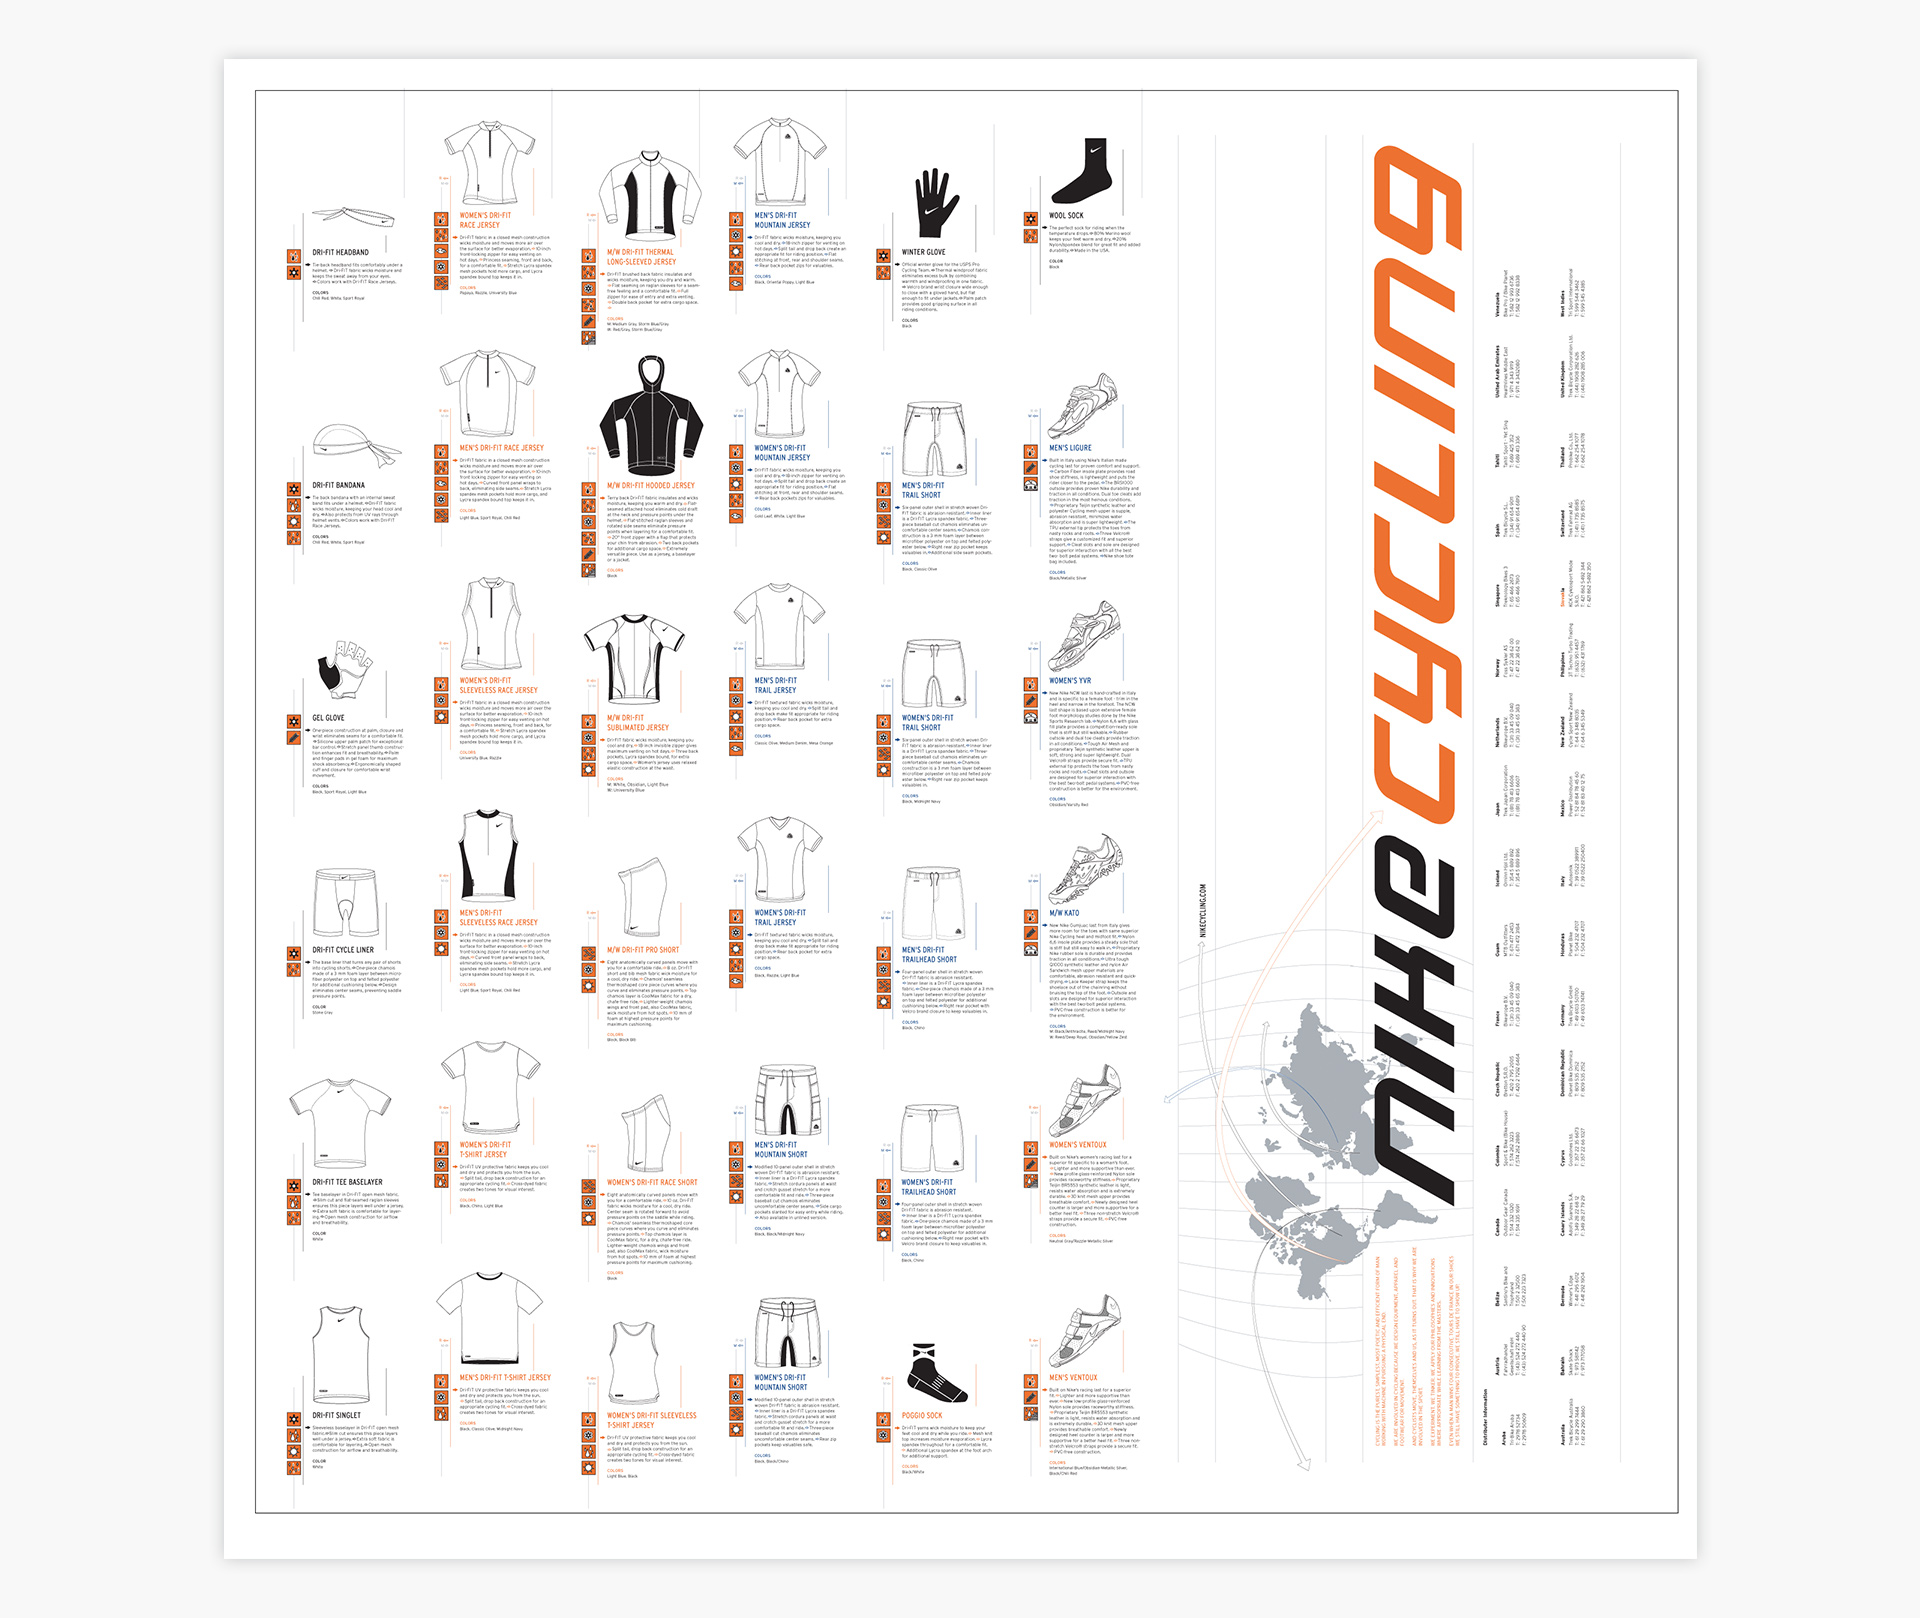 Nike Cycling poster design created by Incubate Design